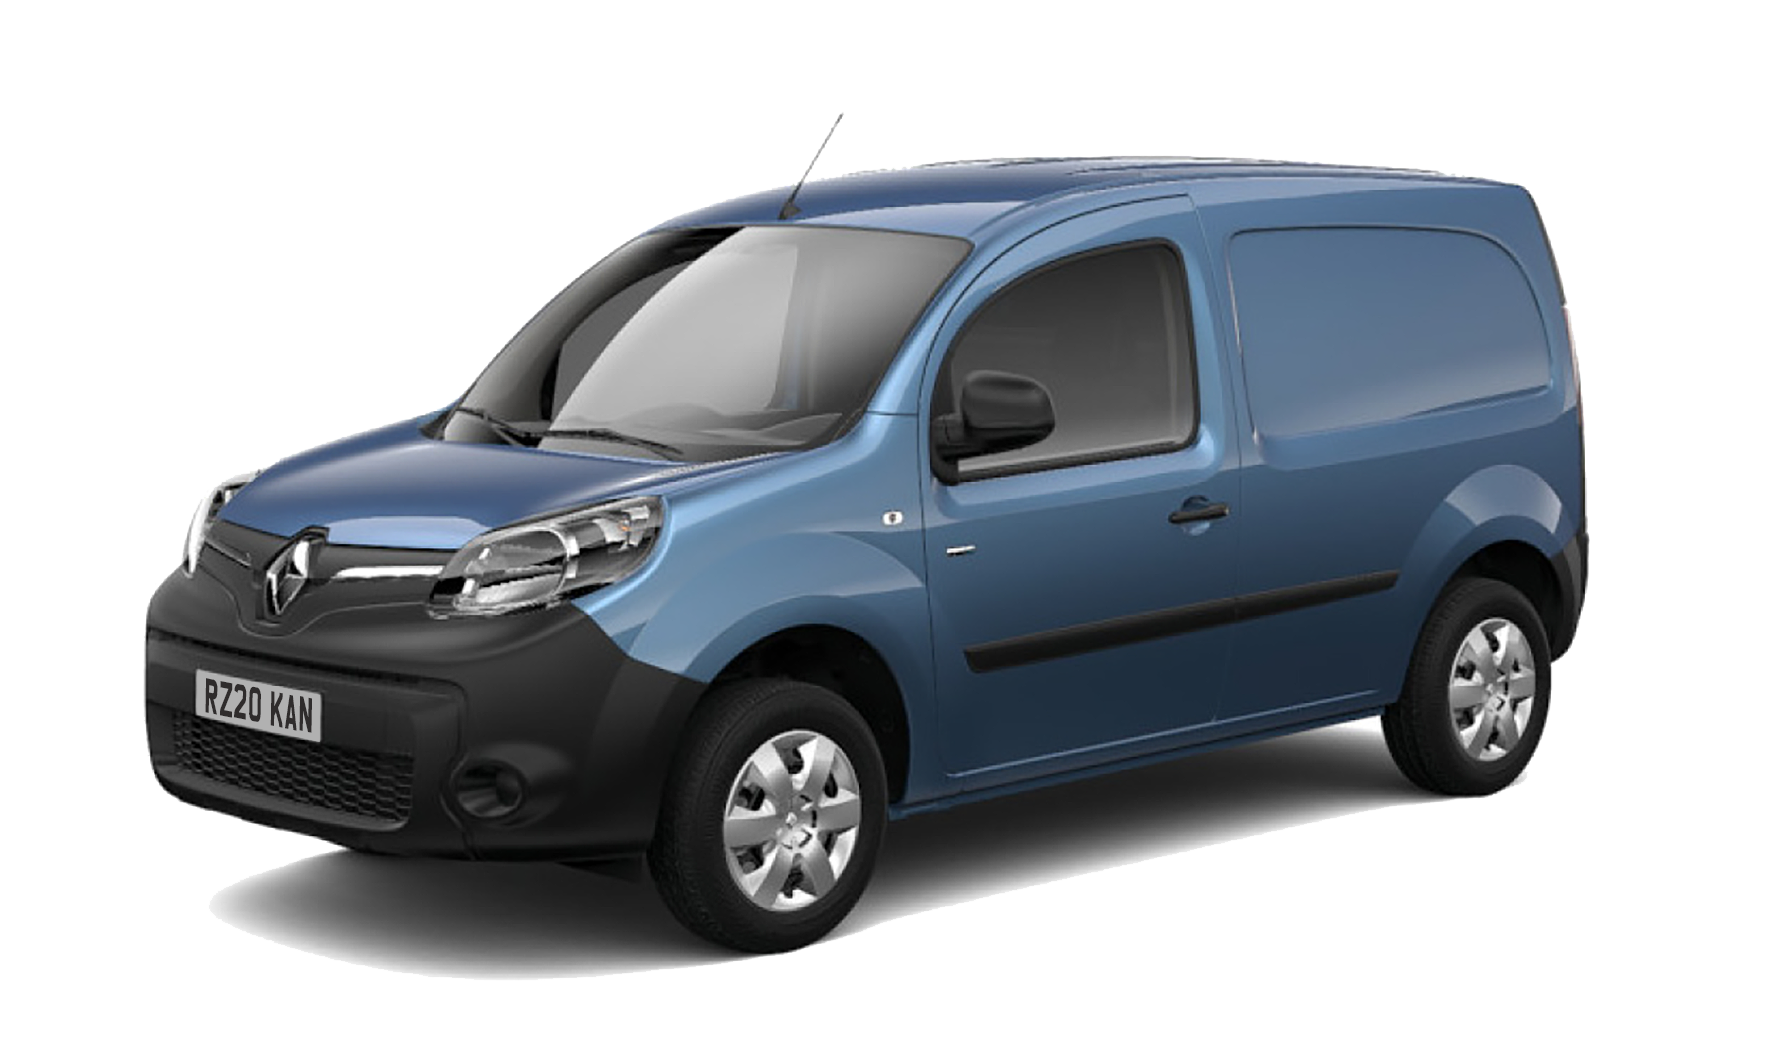 Renault Kangoo dimensions, boot space and electrification